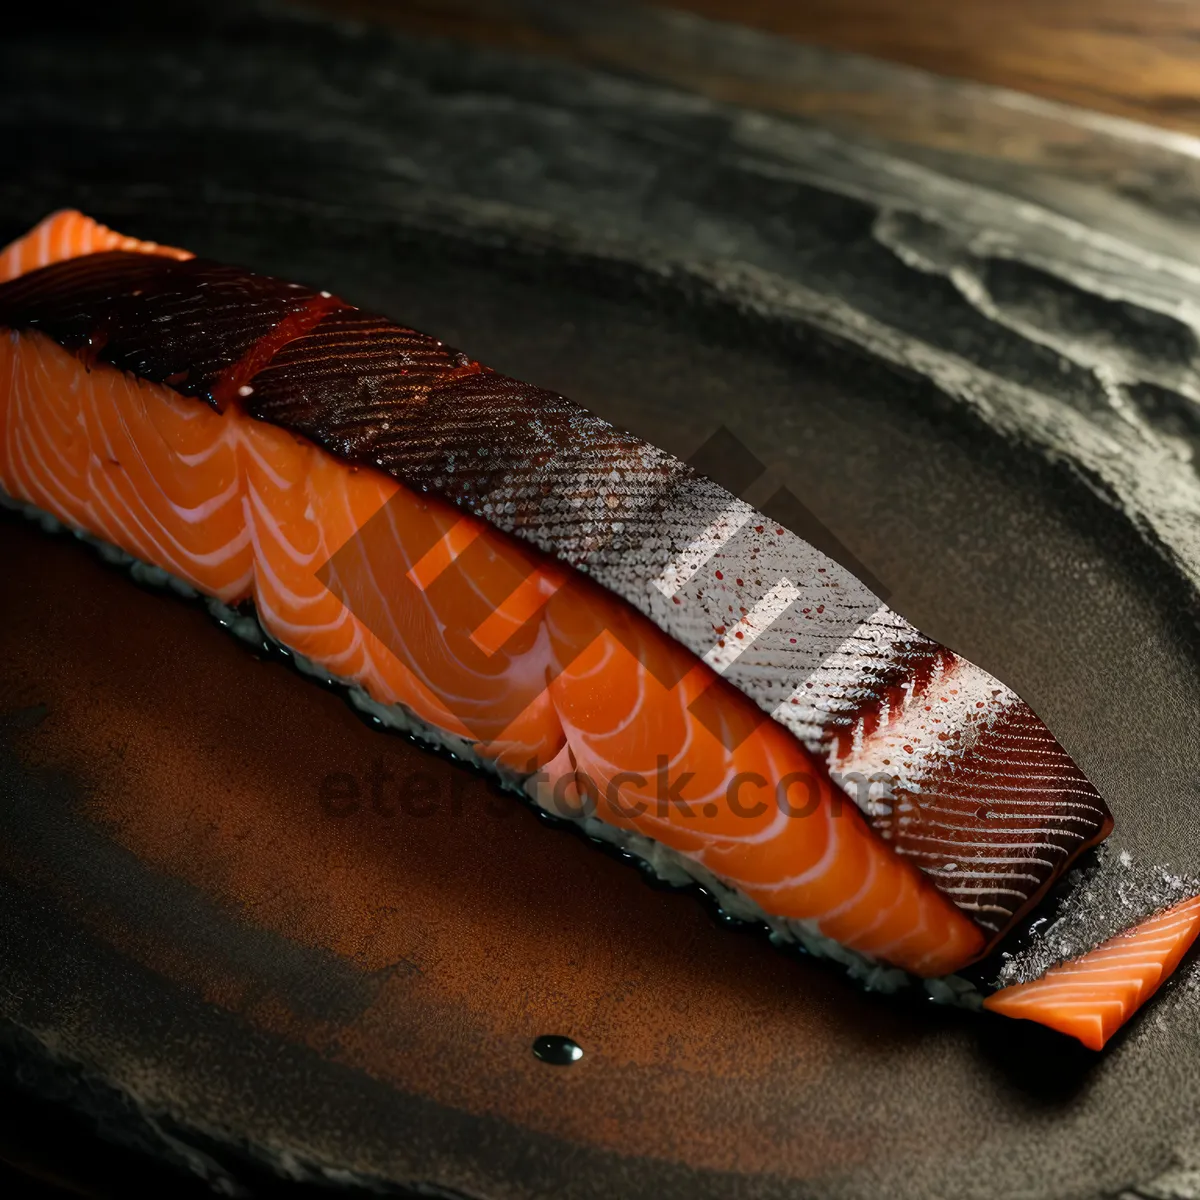 Picture of Knife blade and salmon on cutting board